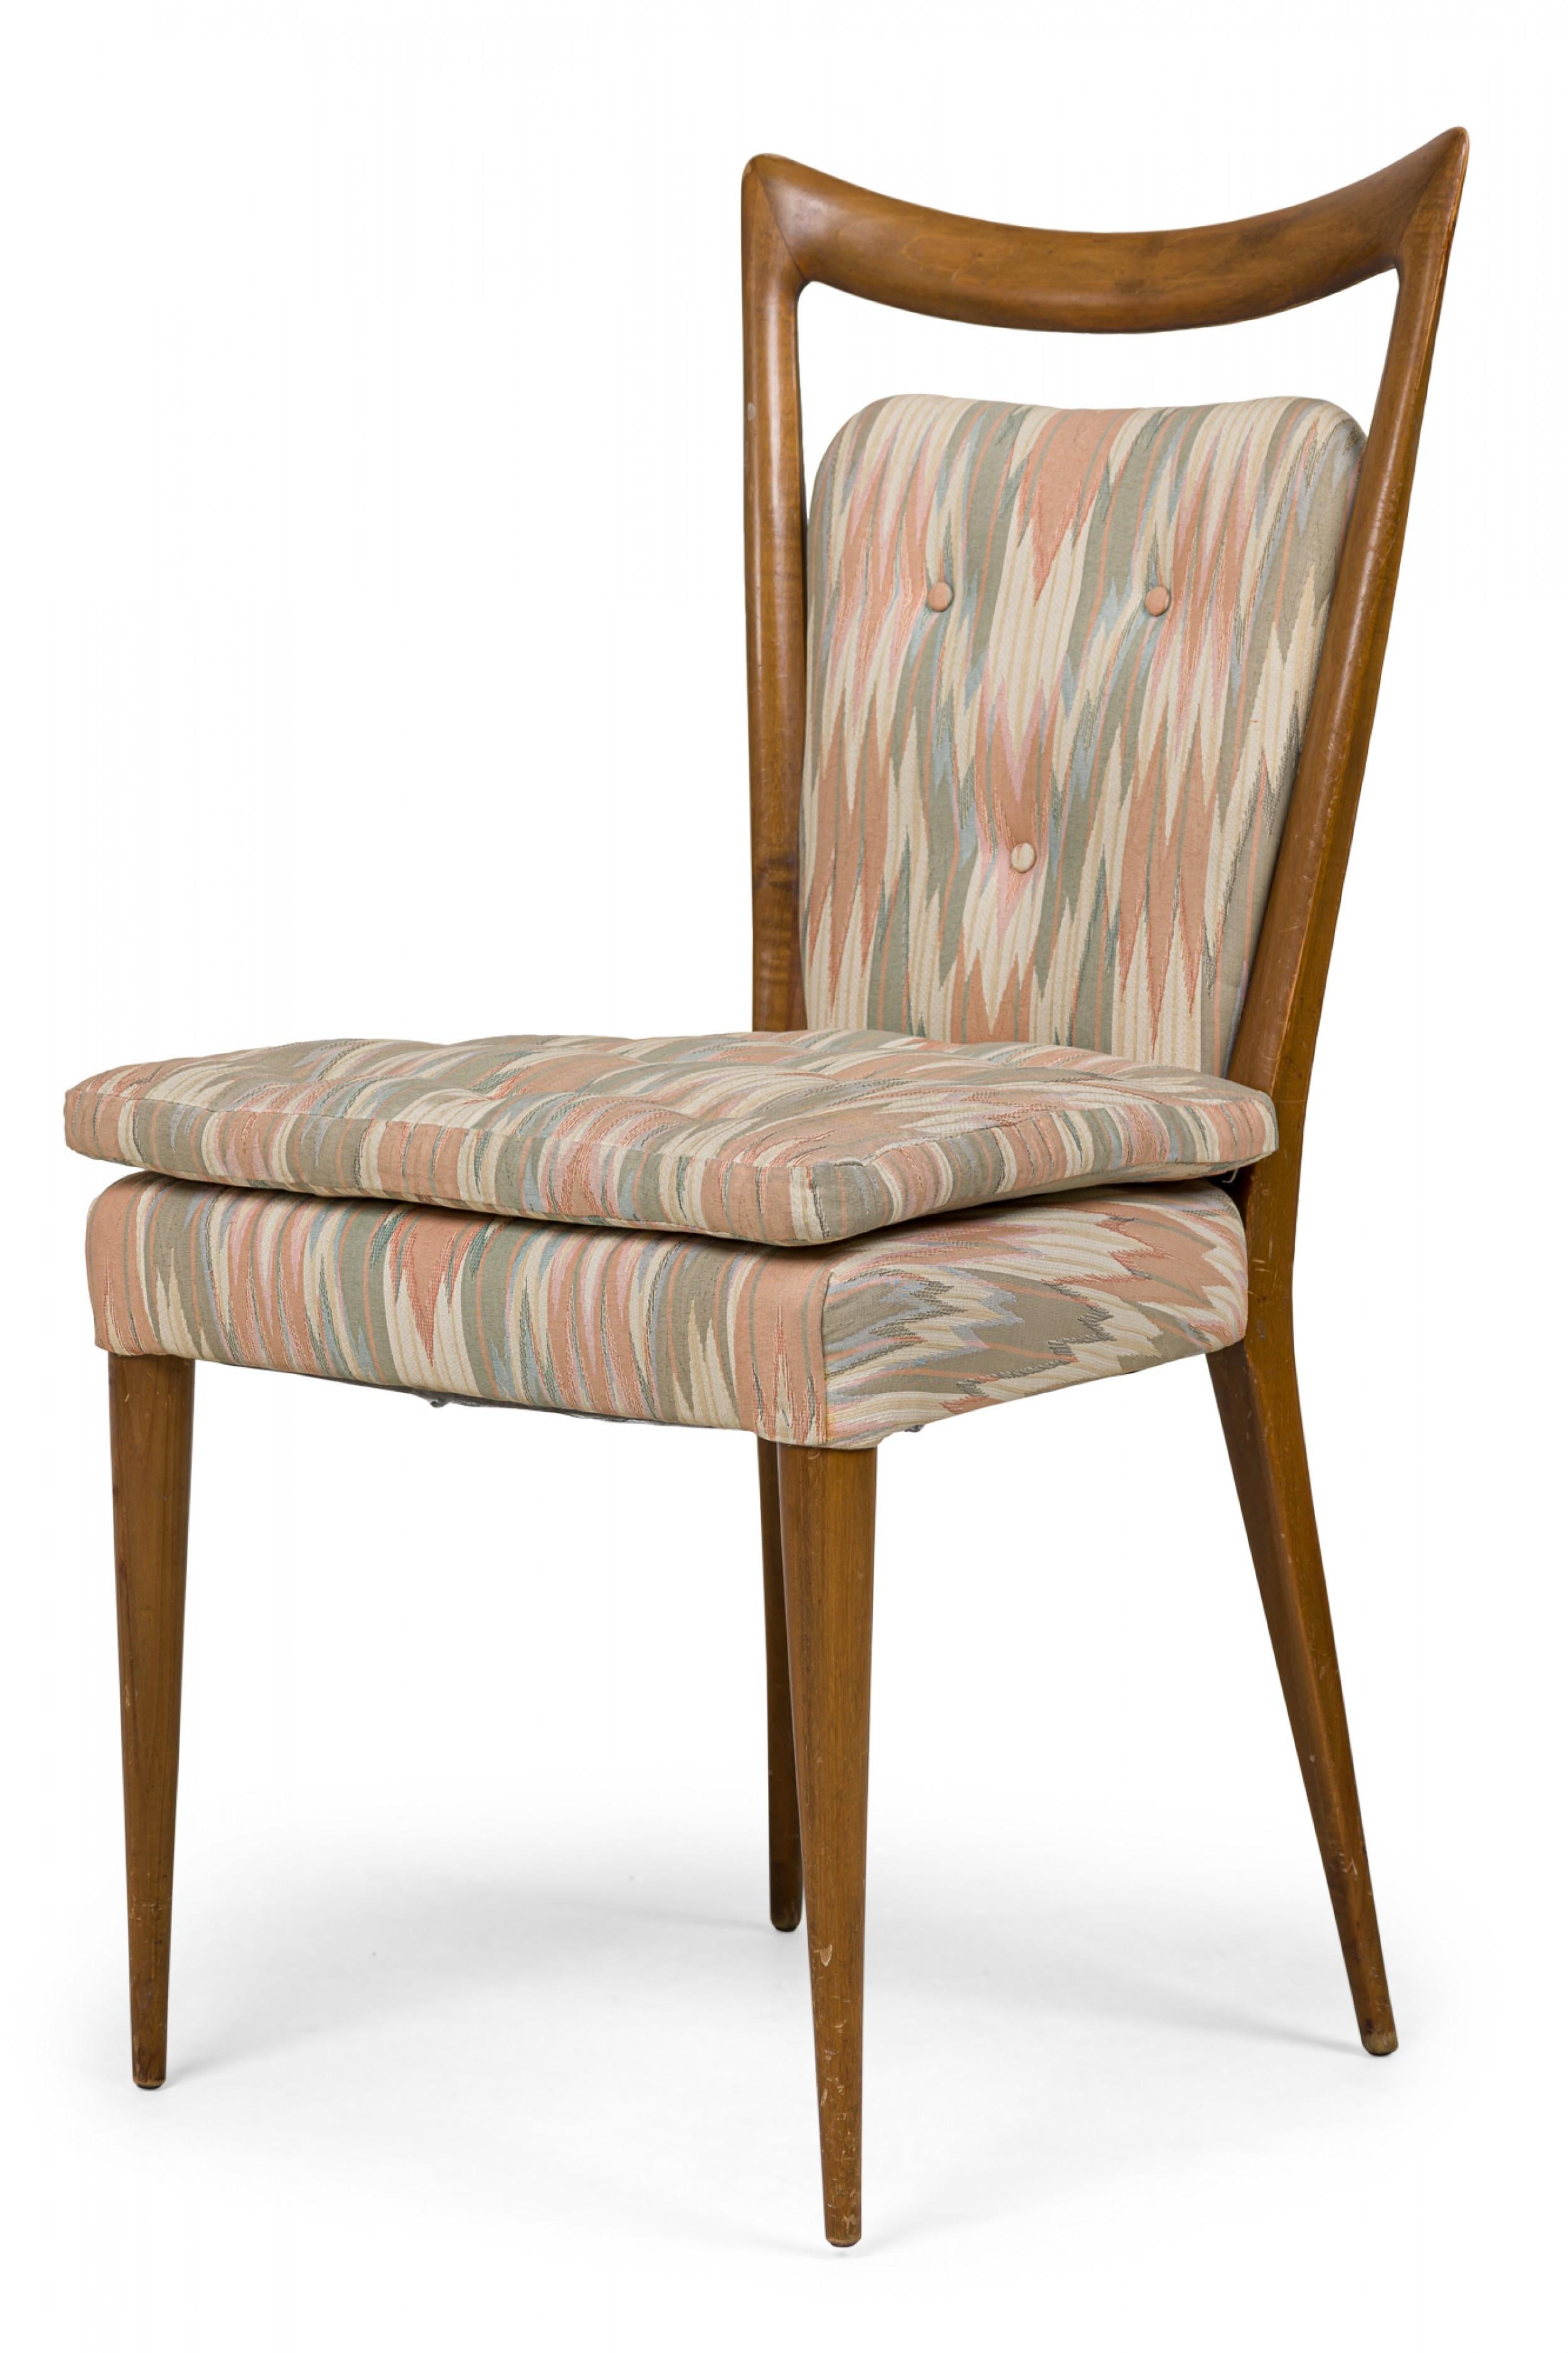 Set of 6 Melchiorre Bega Midcentury Italian Zigzag Upholstered Dining Chairs In Good Condition For Sale In New York, NY